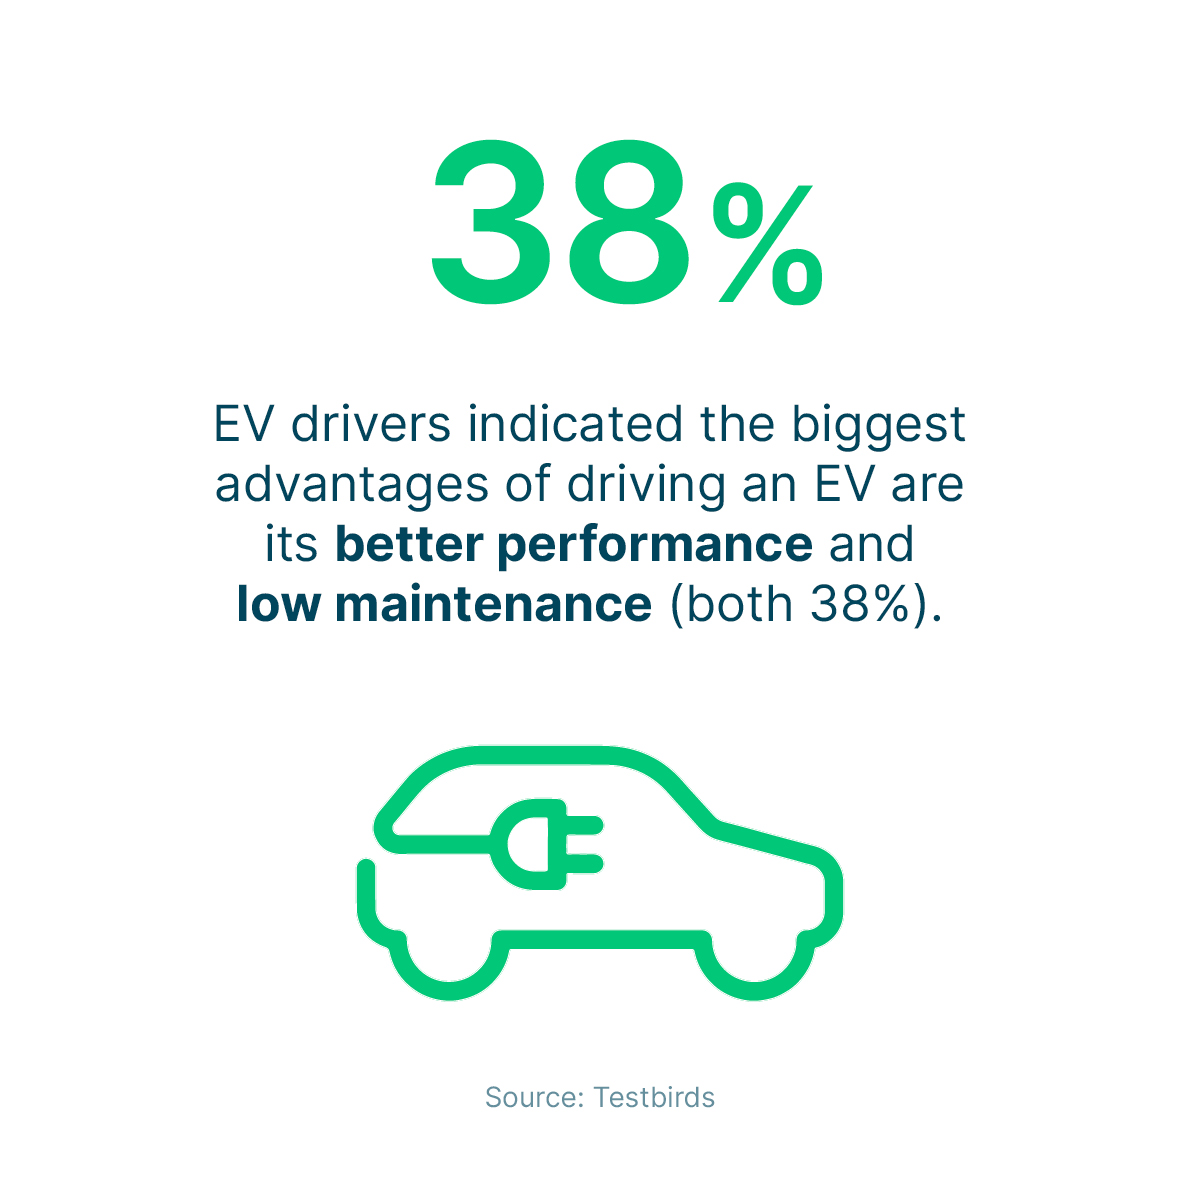 EV drivers indicated the biggest advantages of driving an EV are its better performance and low maintenance (both 38%). - Automotive Crowd Insights